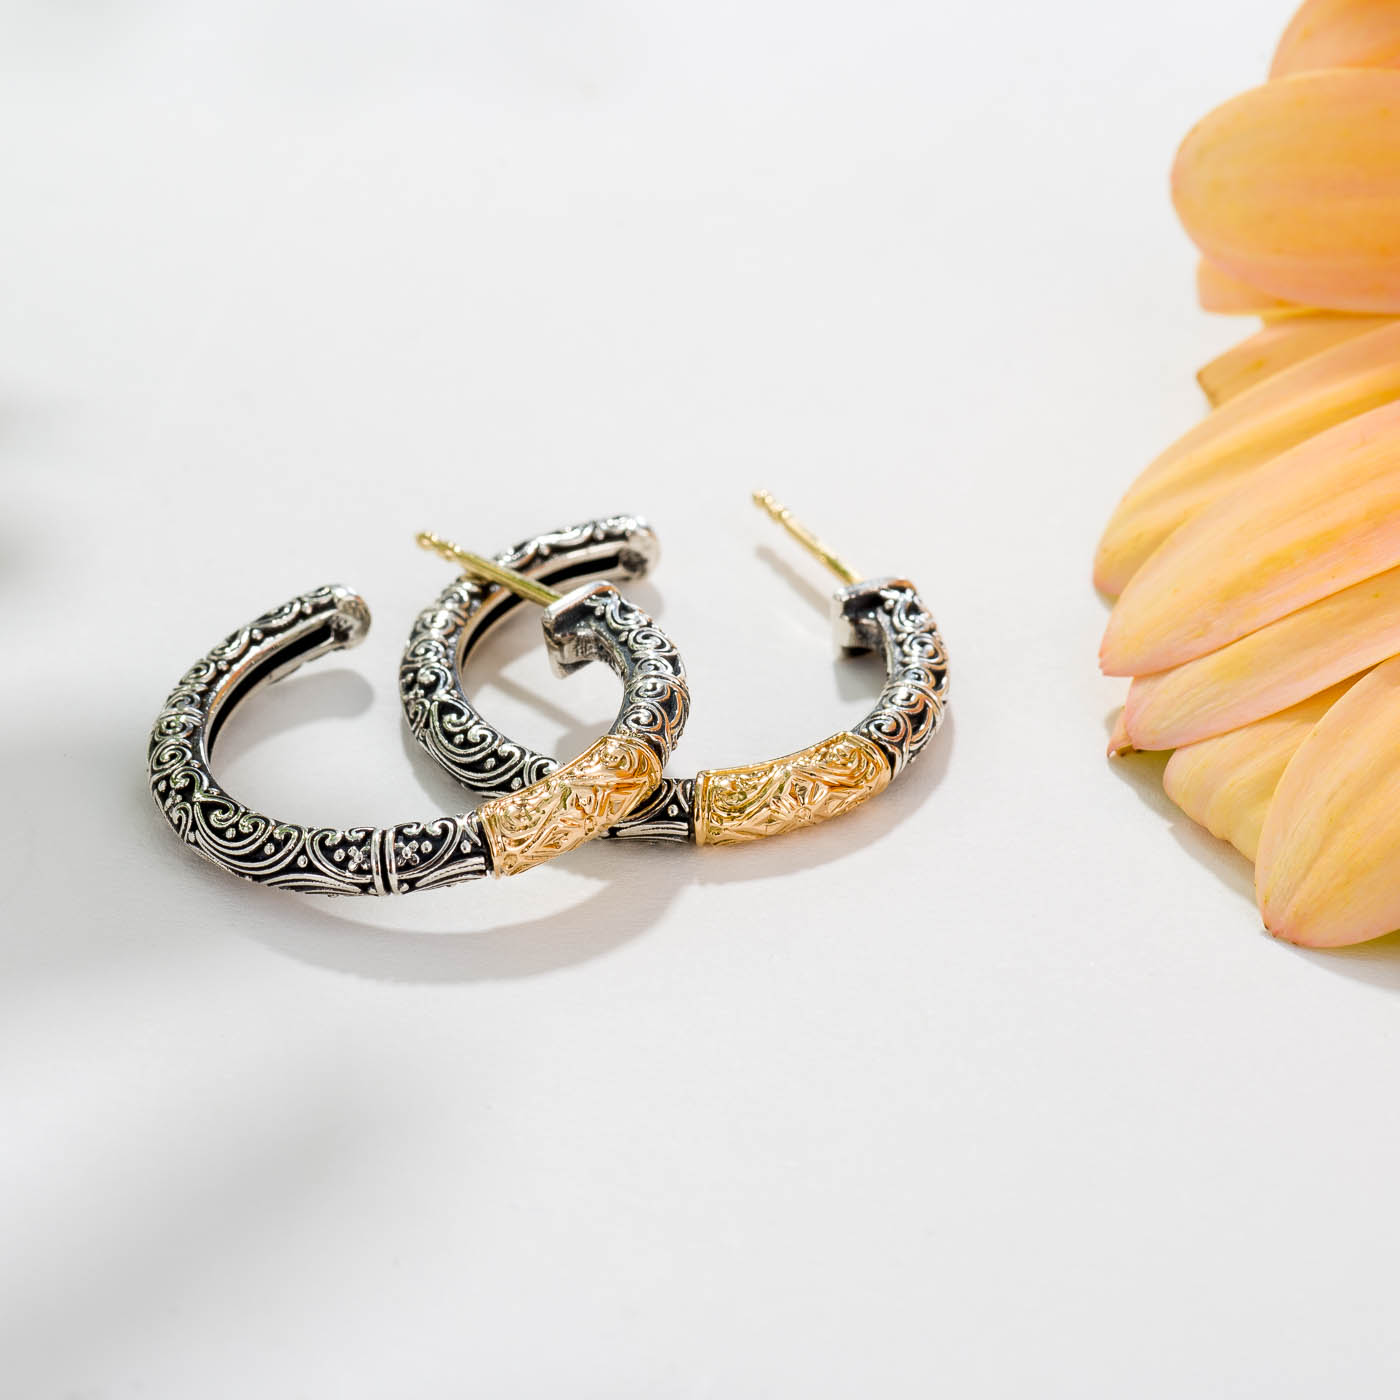 Eve hoops Earrings in 18K Gold and Sterling Silver